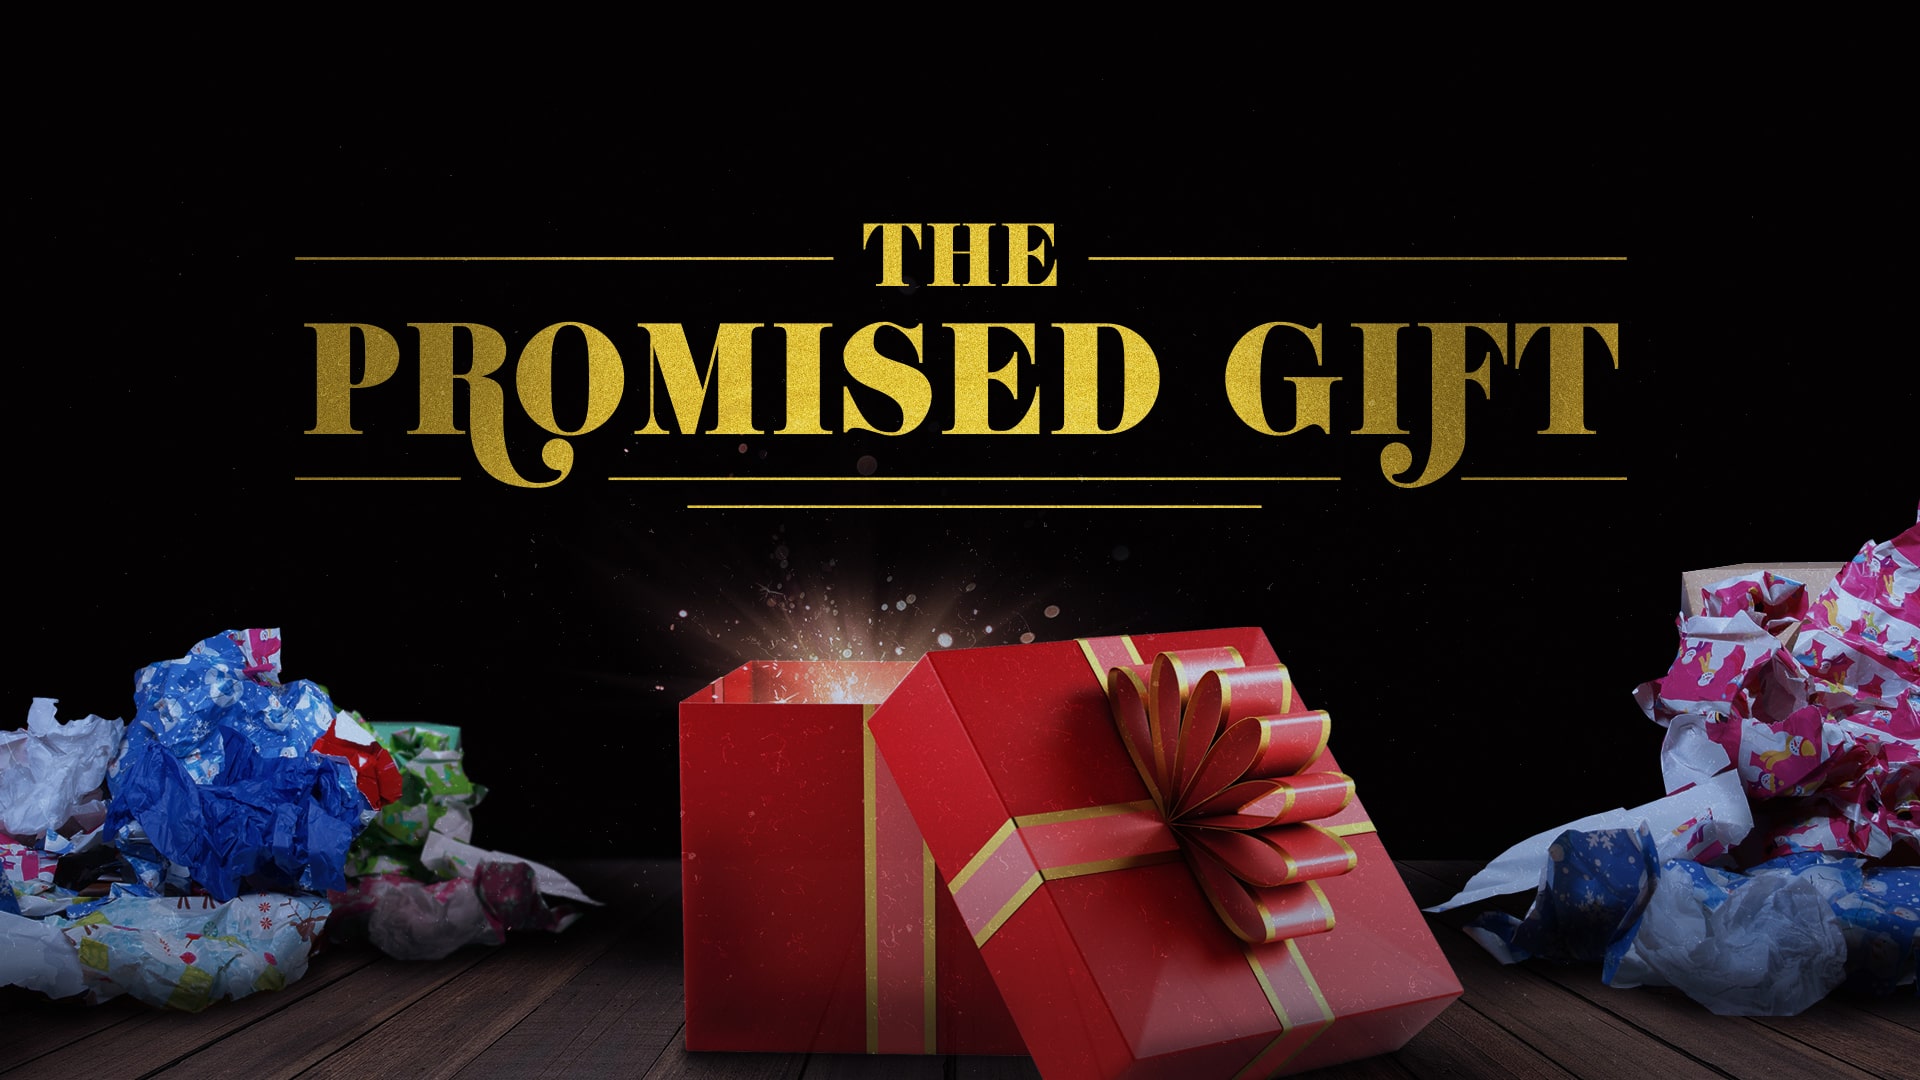 The Promised Gift